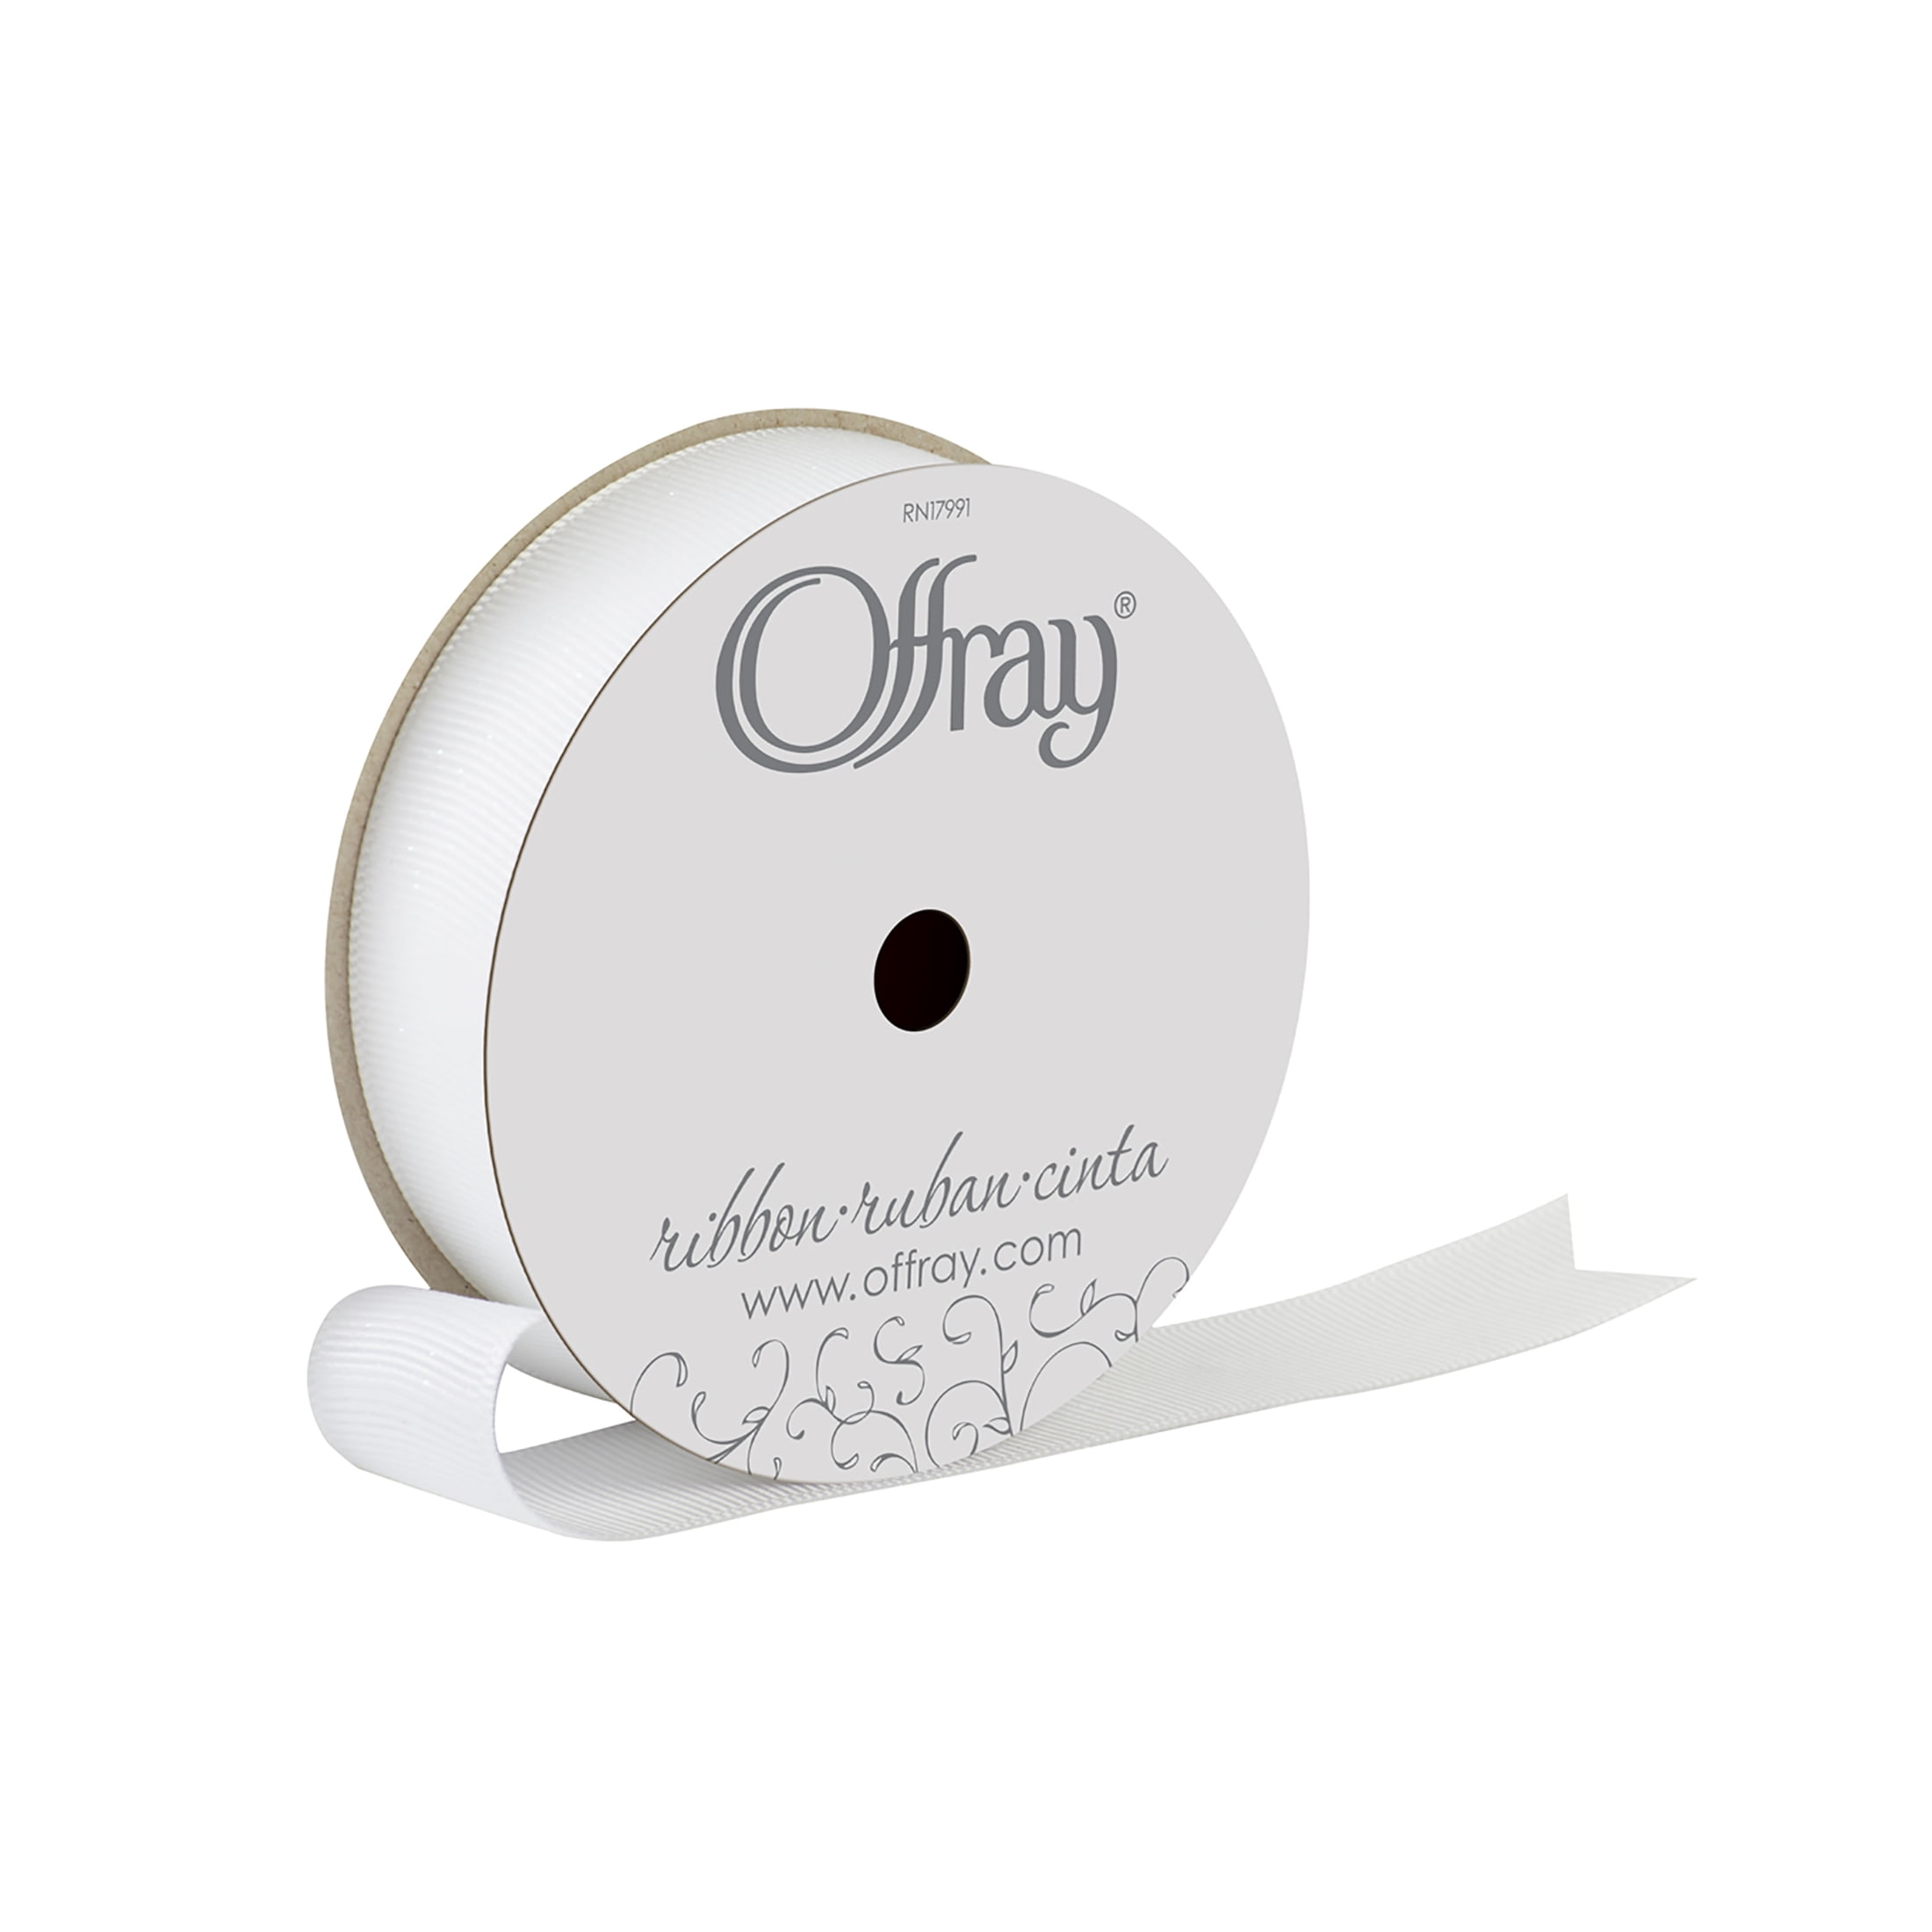 Offray Ribbon, White 7/8 inch Grosgrain Glitter Polyester Ribbon for Sewing, Crafts, and Gifting, 9 feet, 1 Each